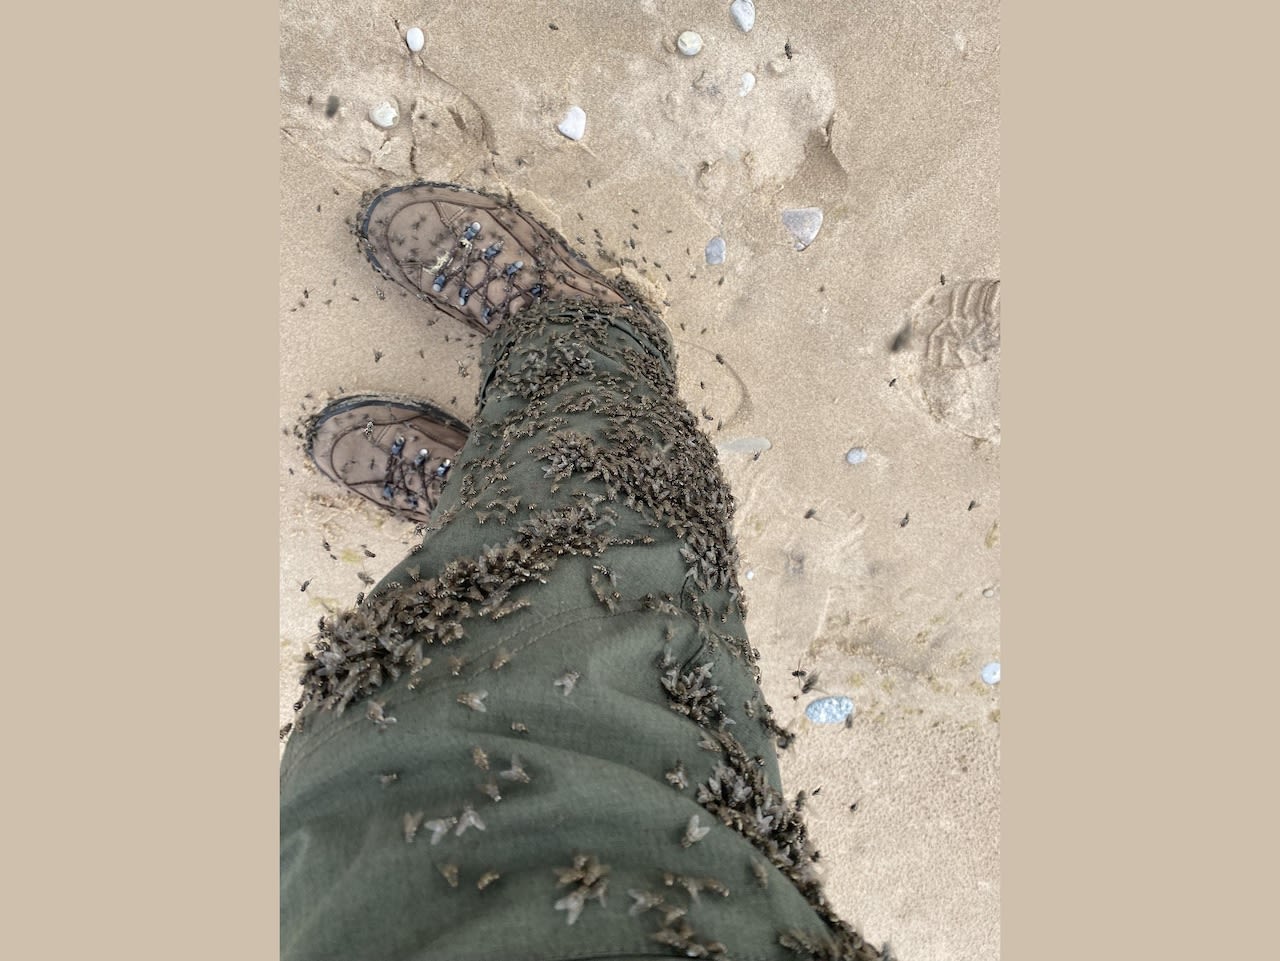 How to limit painful bites from flies swarming at Pictured Rocks, Sleeping Bear Dunes